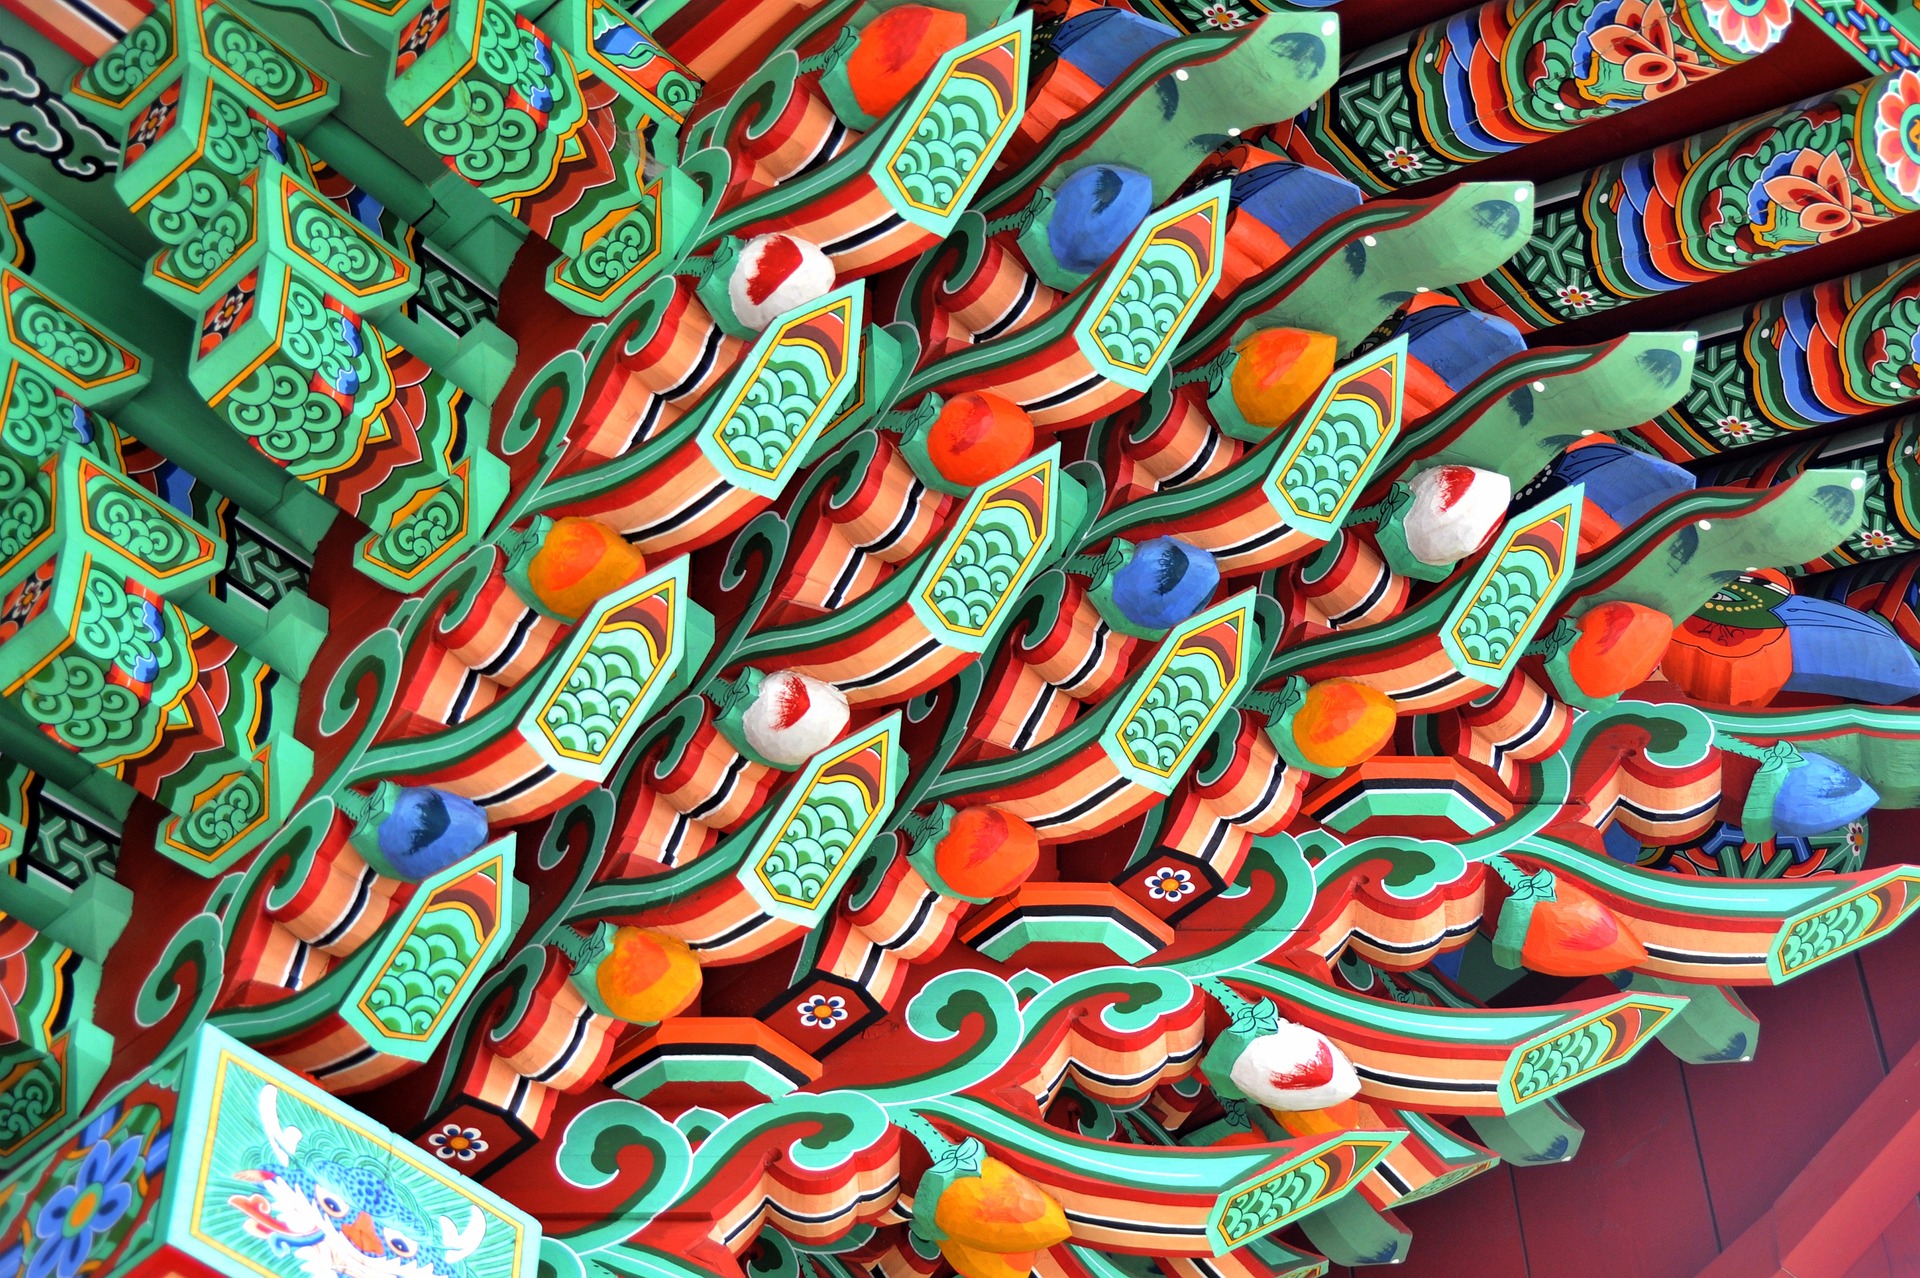 Dancheong: The Colorful Art of Traditional Korean Architecture - NAKD SEOUL